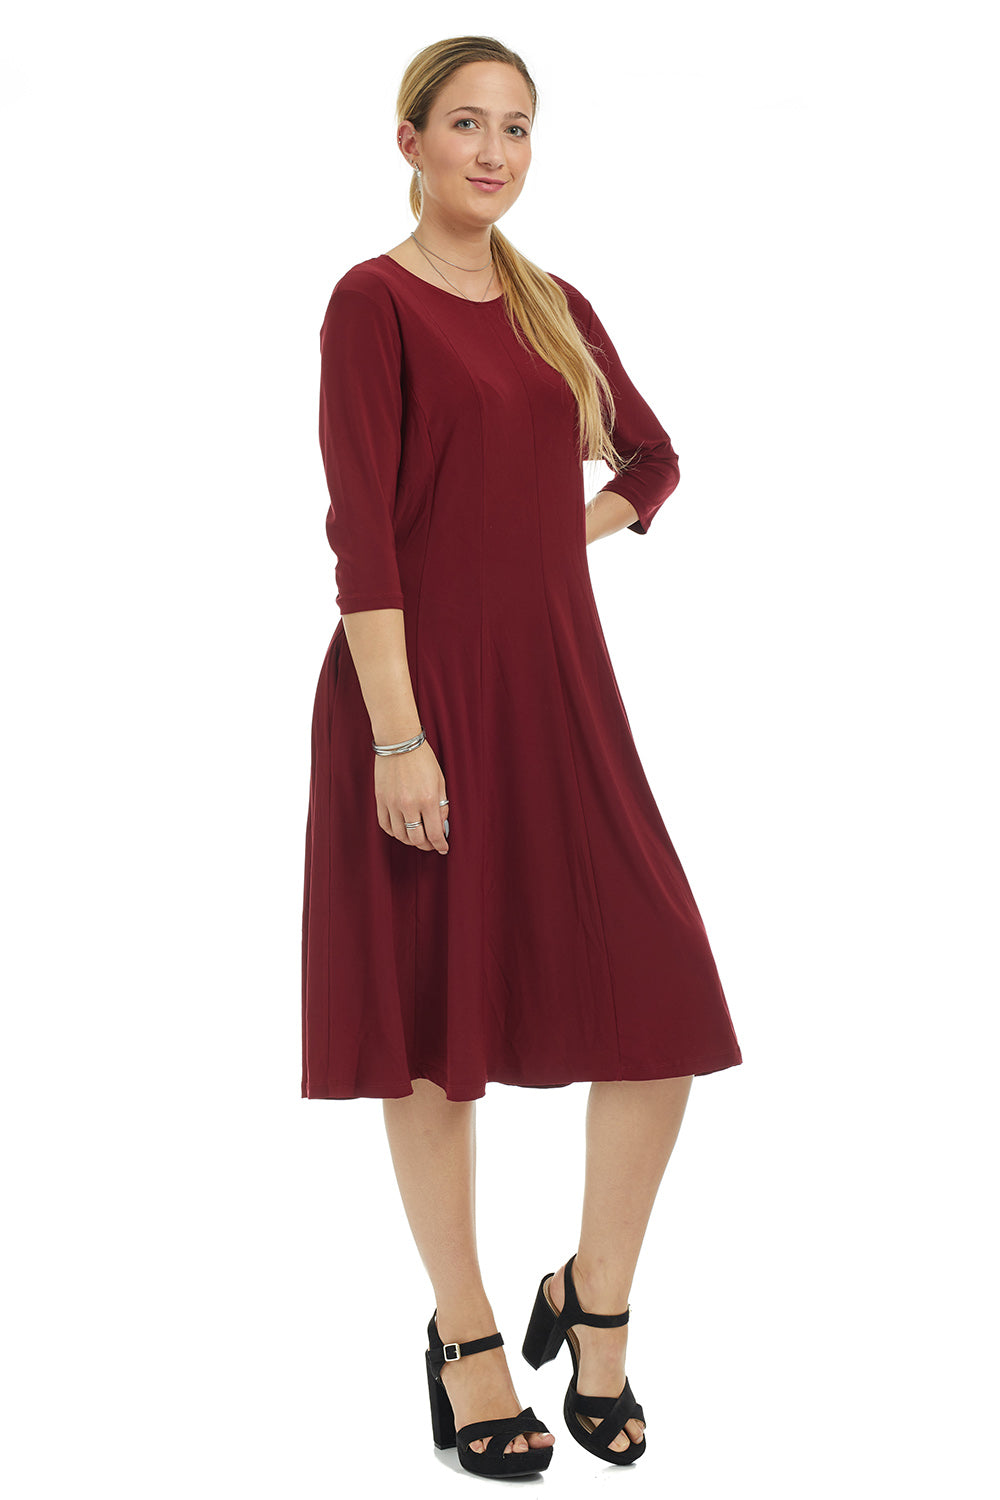 Esteez JUDEE Dress - Womens Classic Fit and Flare Dress with pockets - BURGANDY